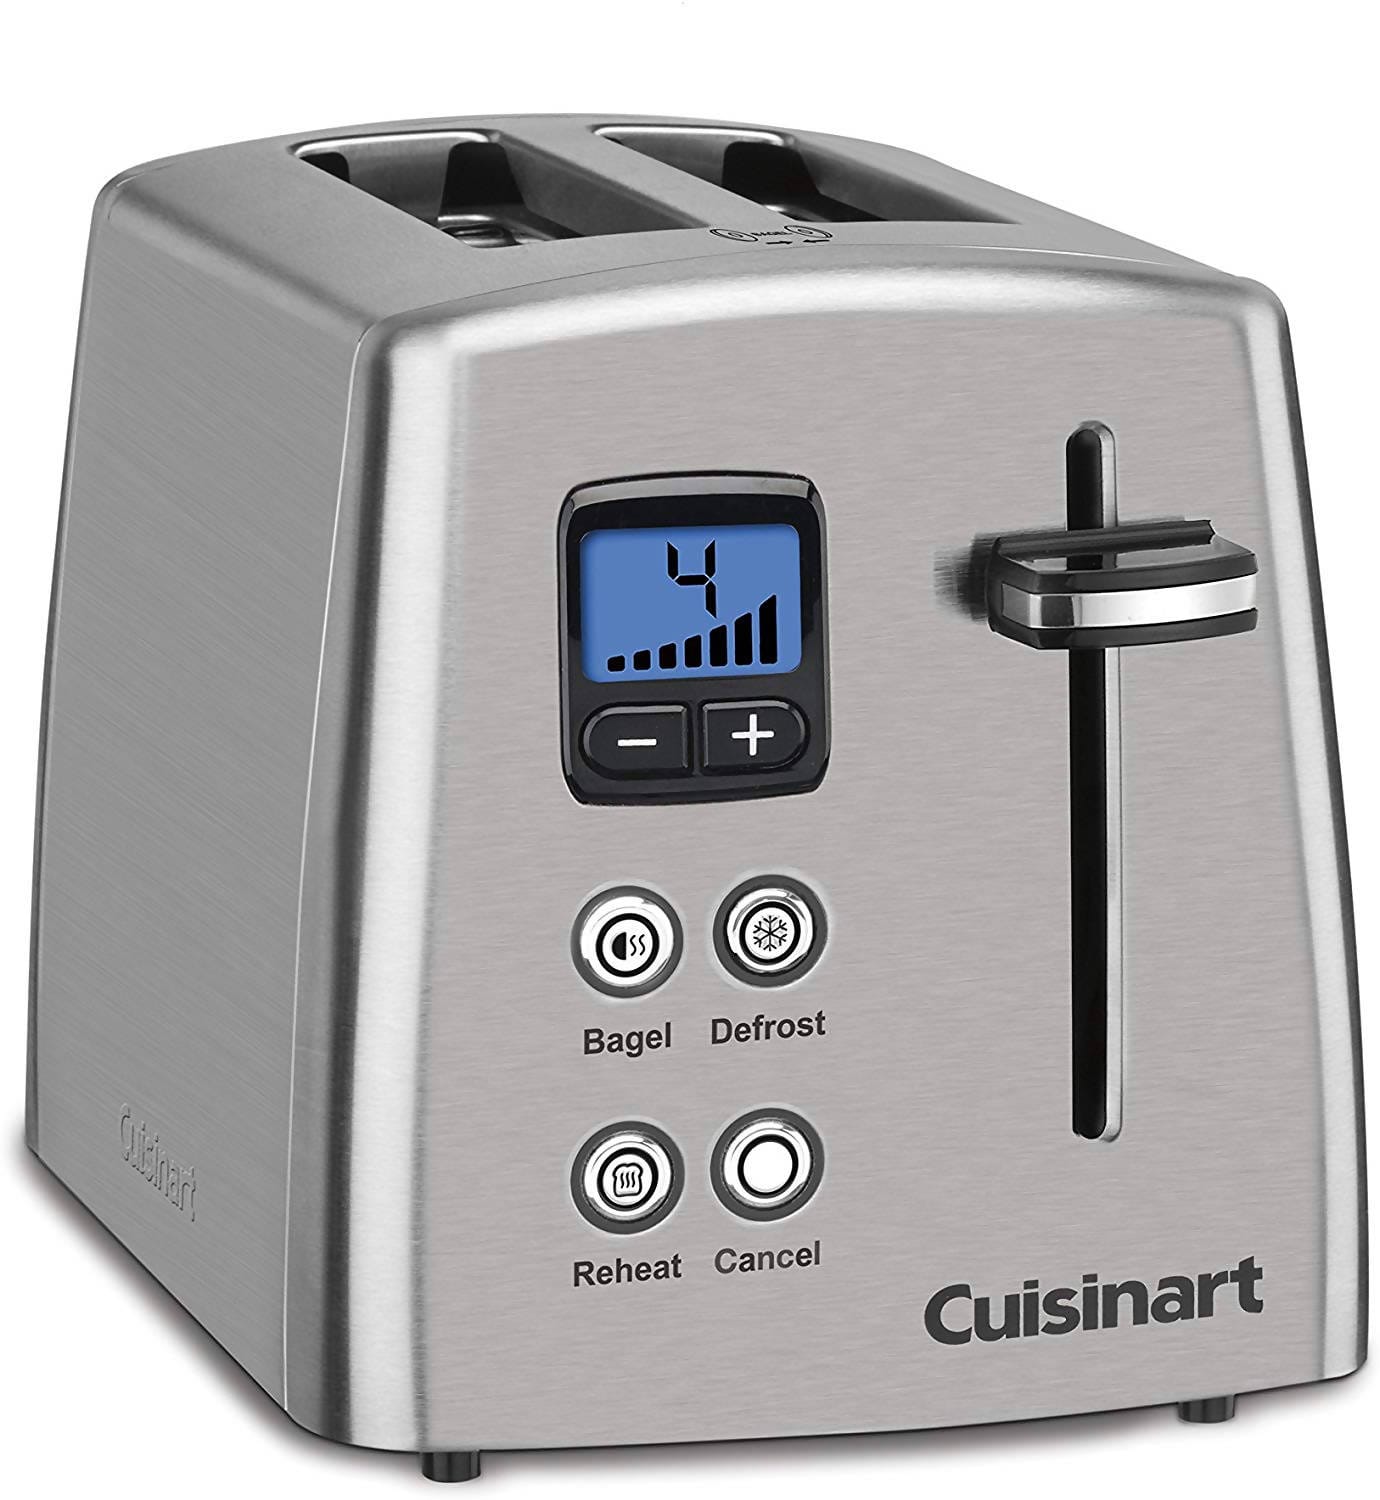 Cuisinart Countdown 2-Slice Stainless Steel Toaster - CU-CPT-415